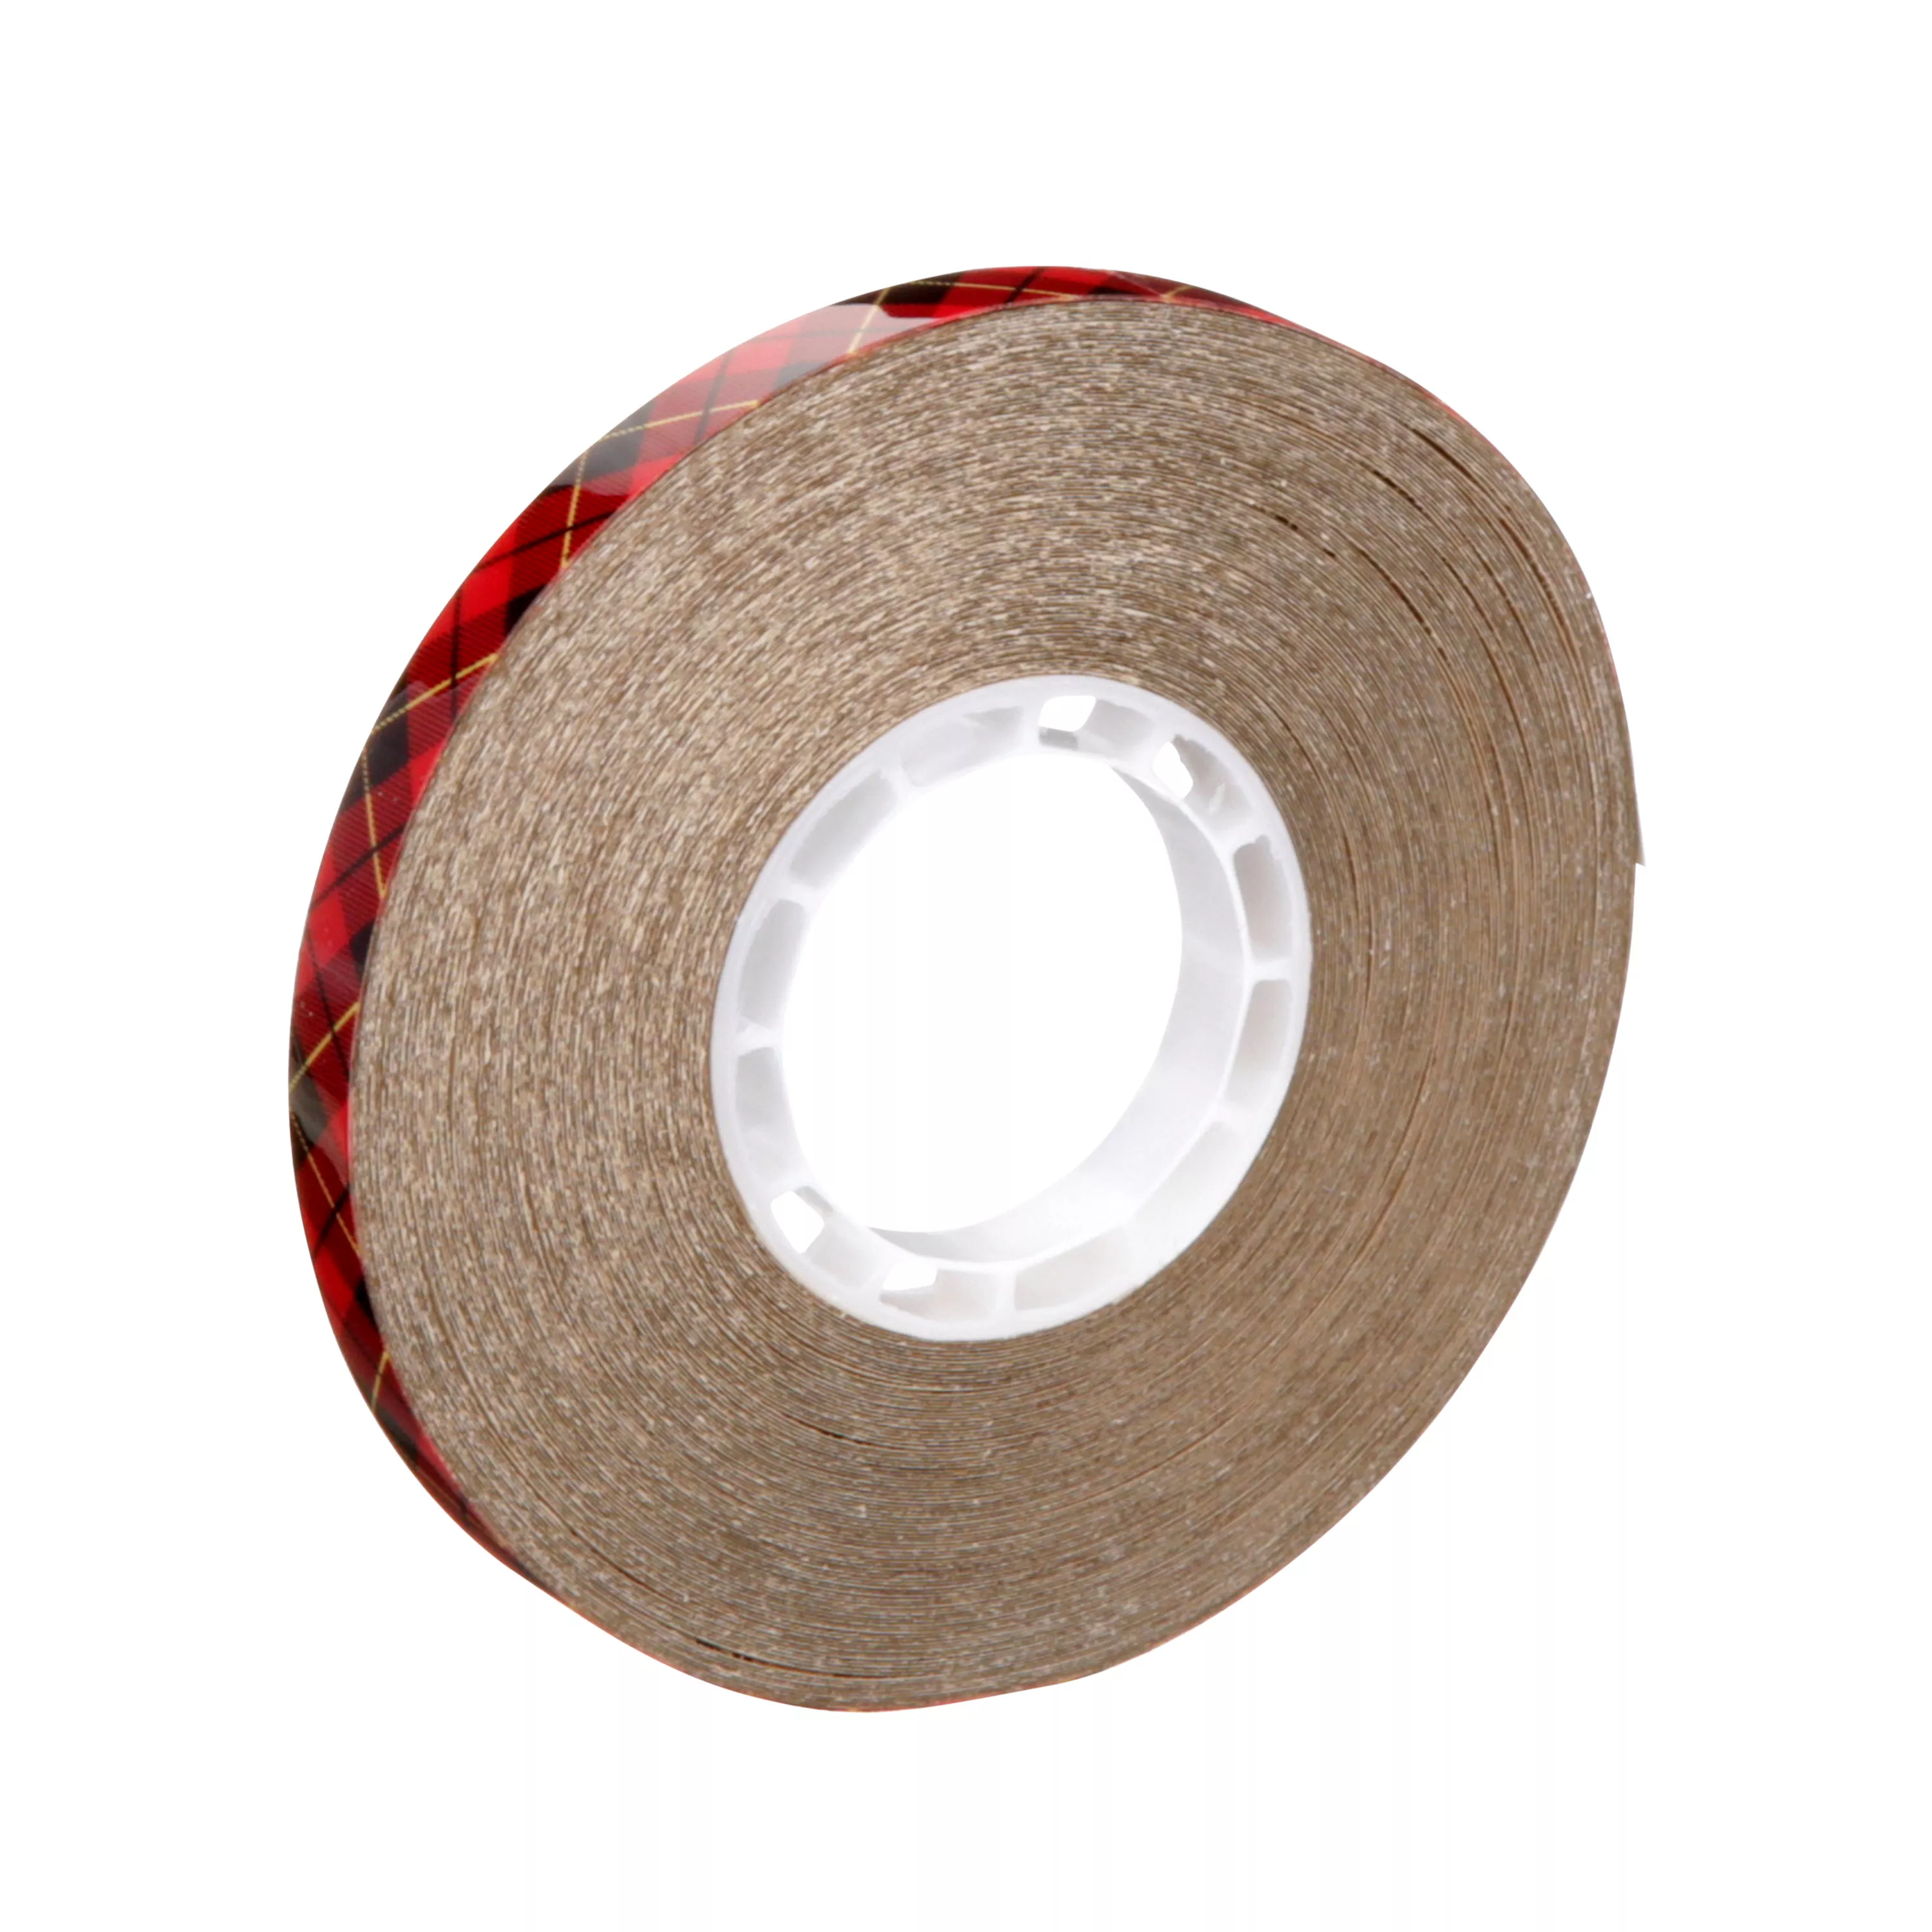 Scotch® ATG Adhesive Transfer Tape 969, Clear, 1/4 in x 18 yd, 5 mil,
(12 Roll/Carton) 72 Roll/Case